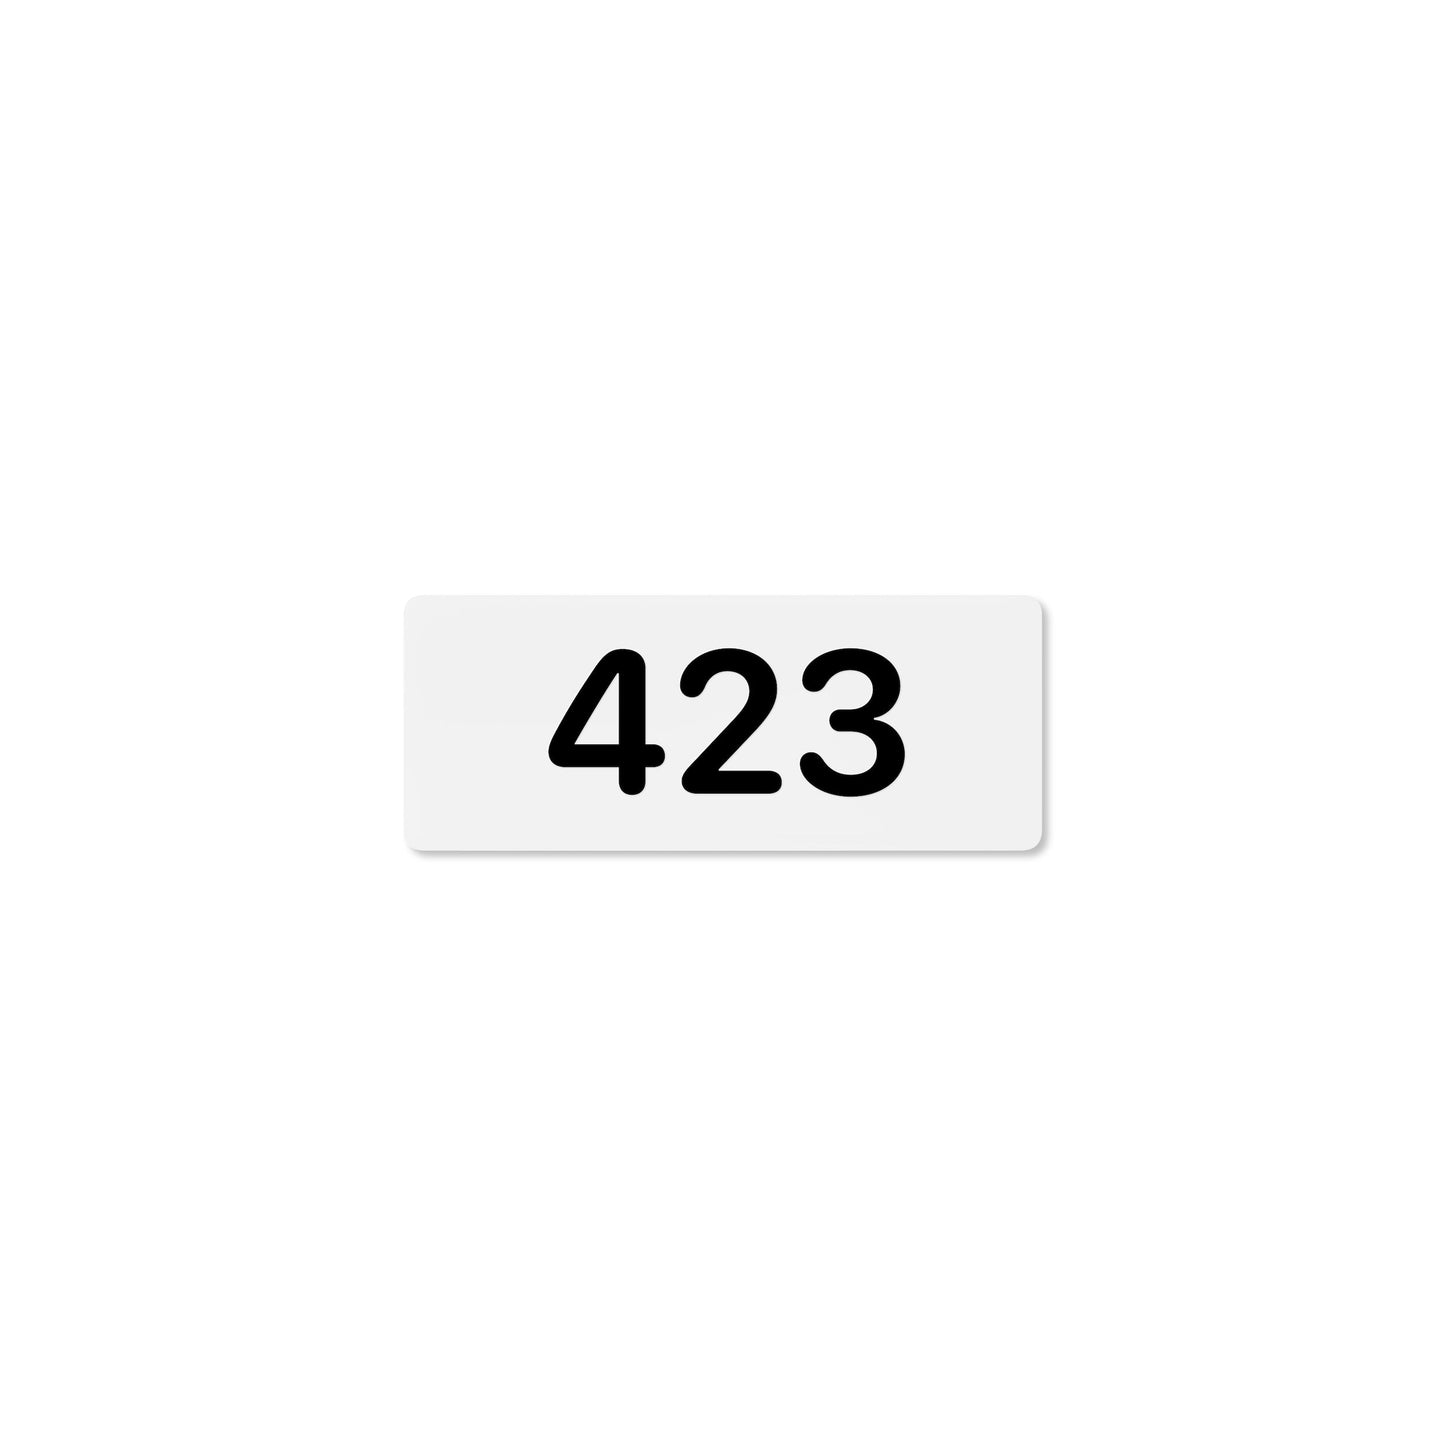 Numeral 423